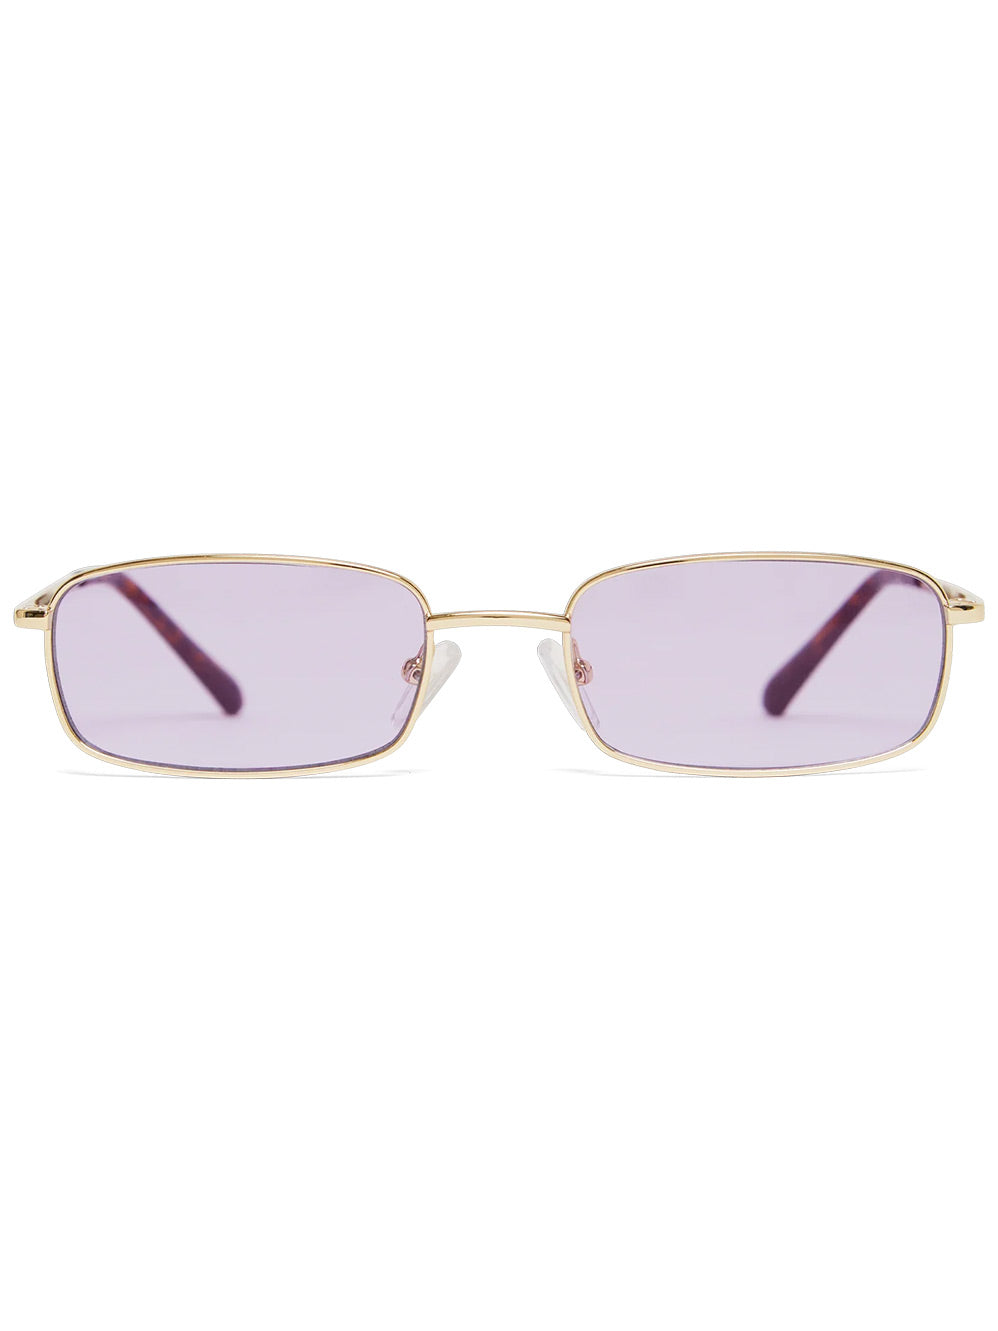 BANBE THE KATE SUNGLASSES